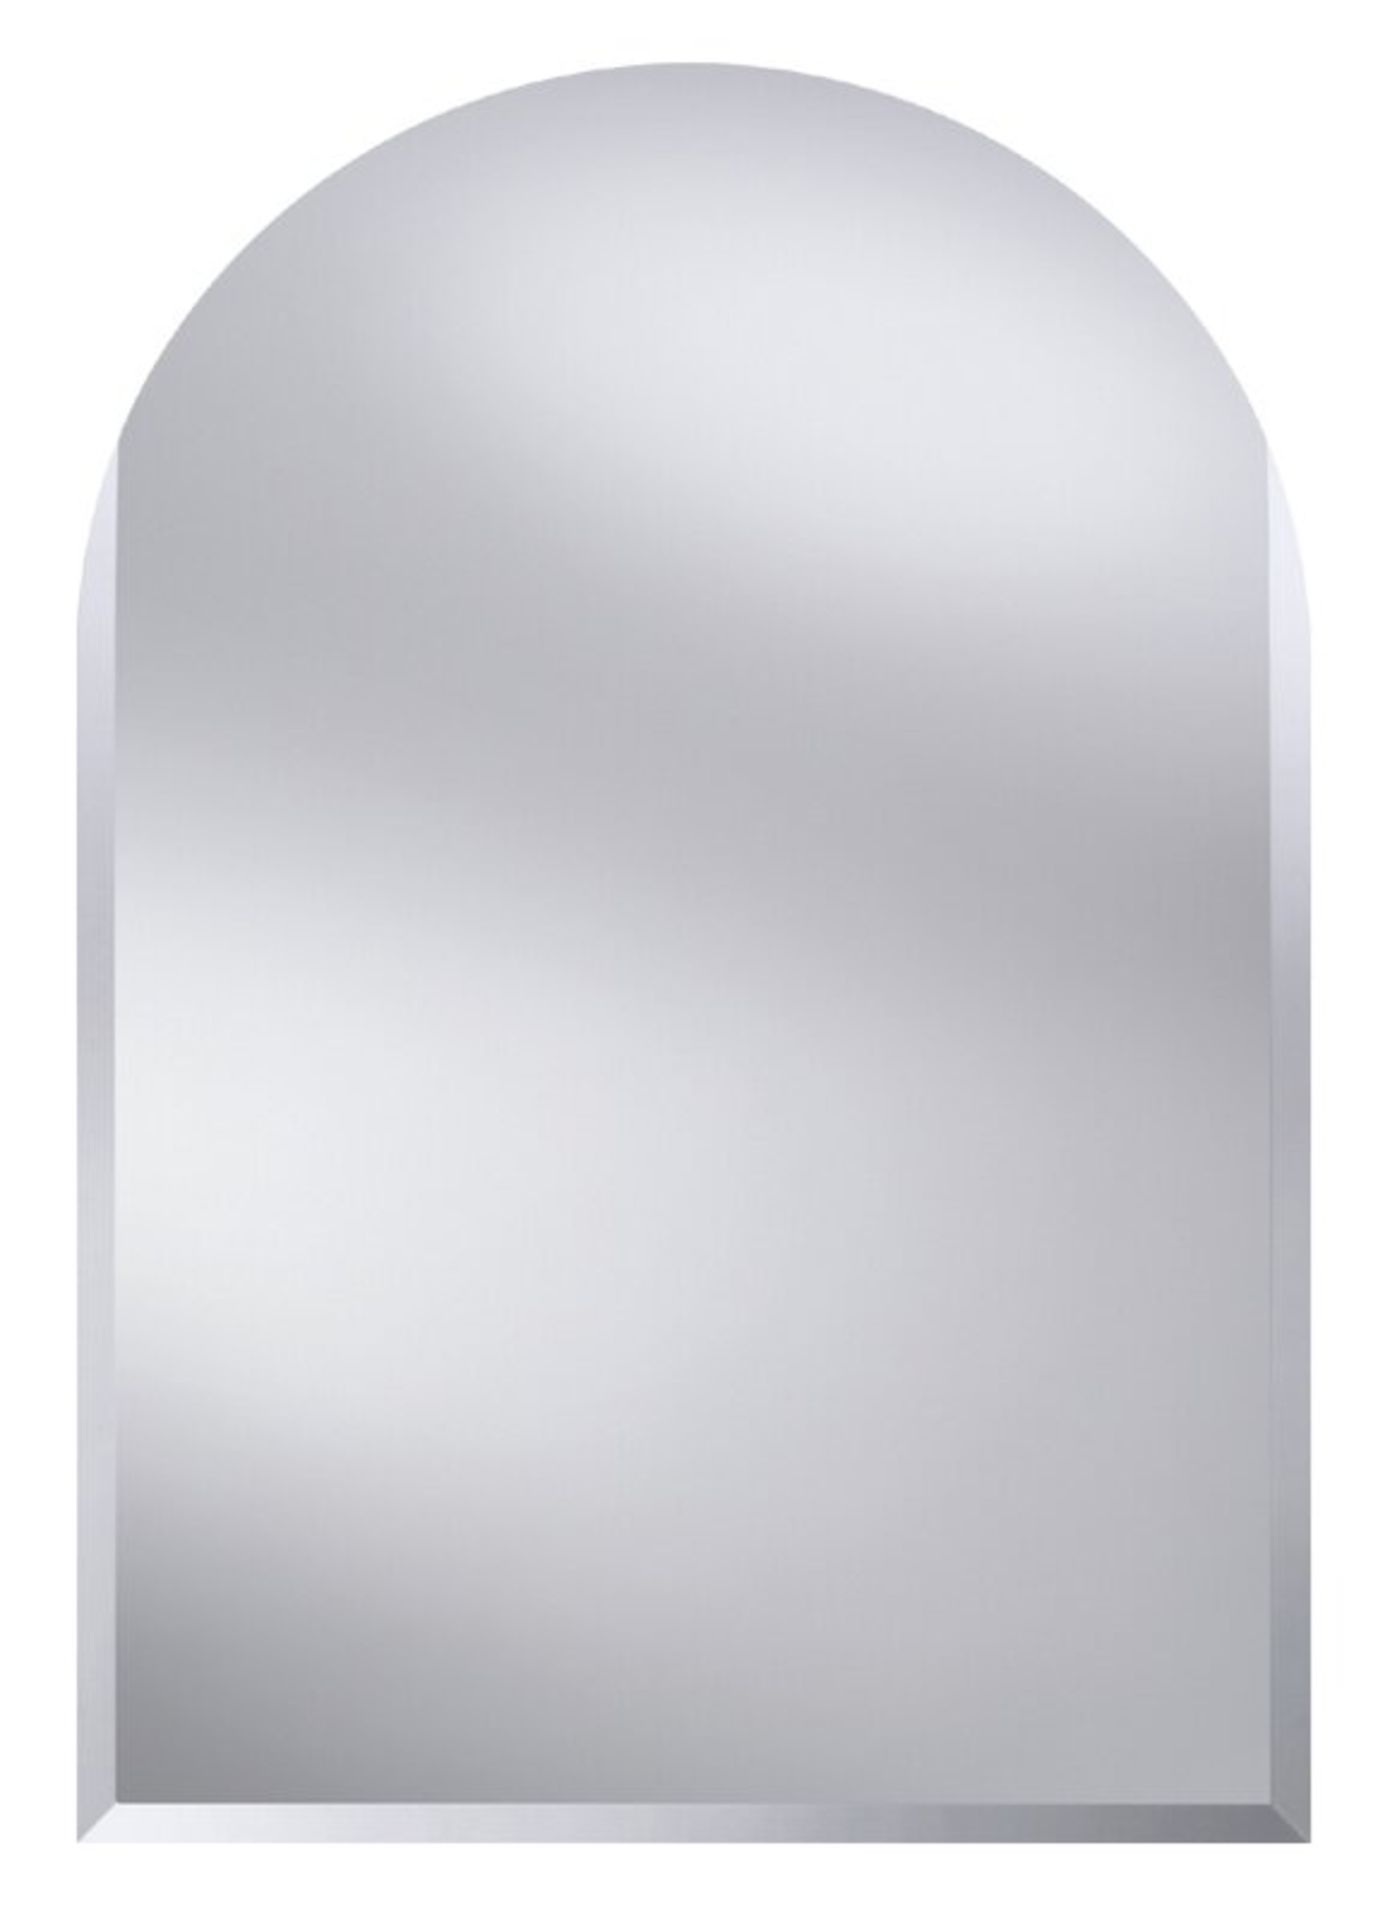 5 x Packs Of 3 Bevelled Mirrors RRP 250.00